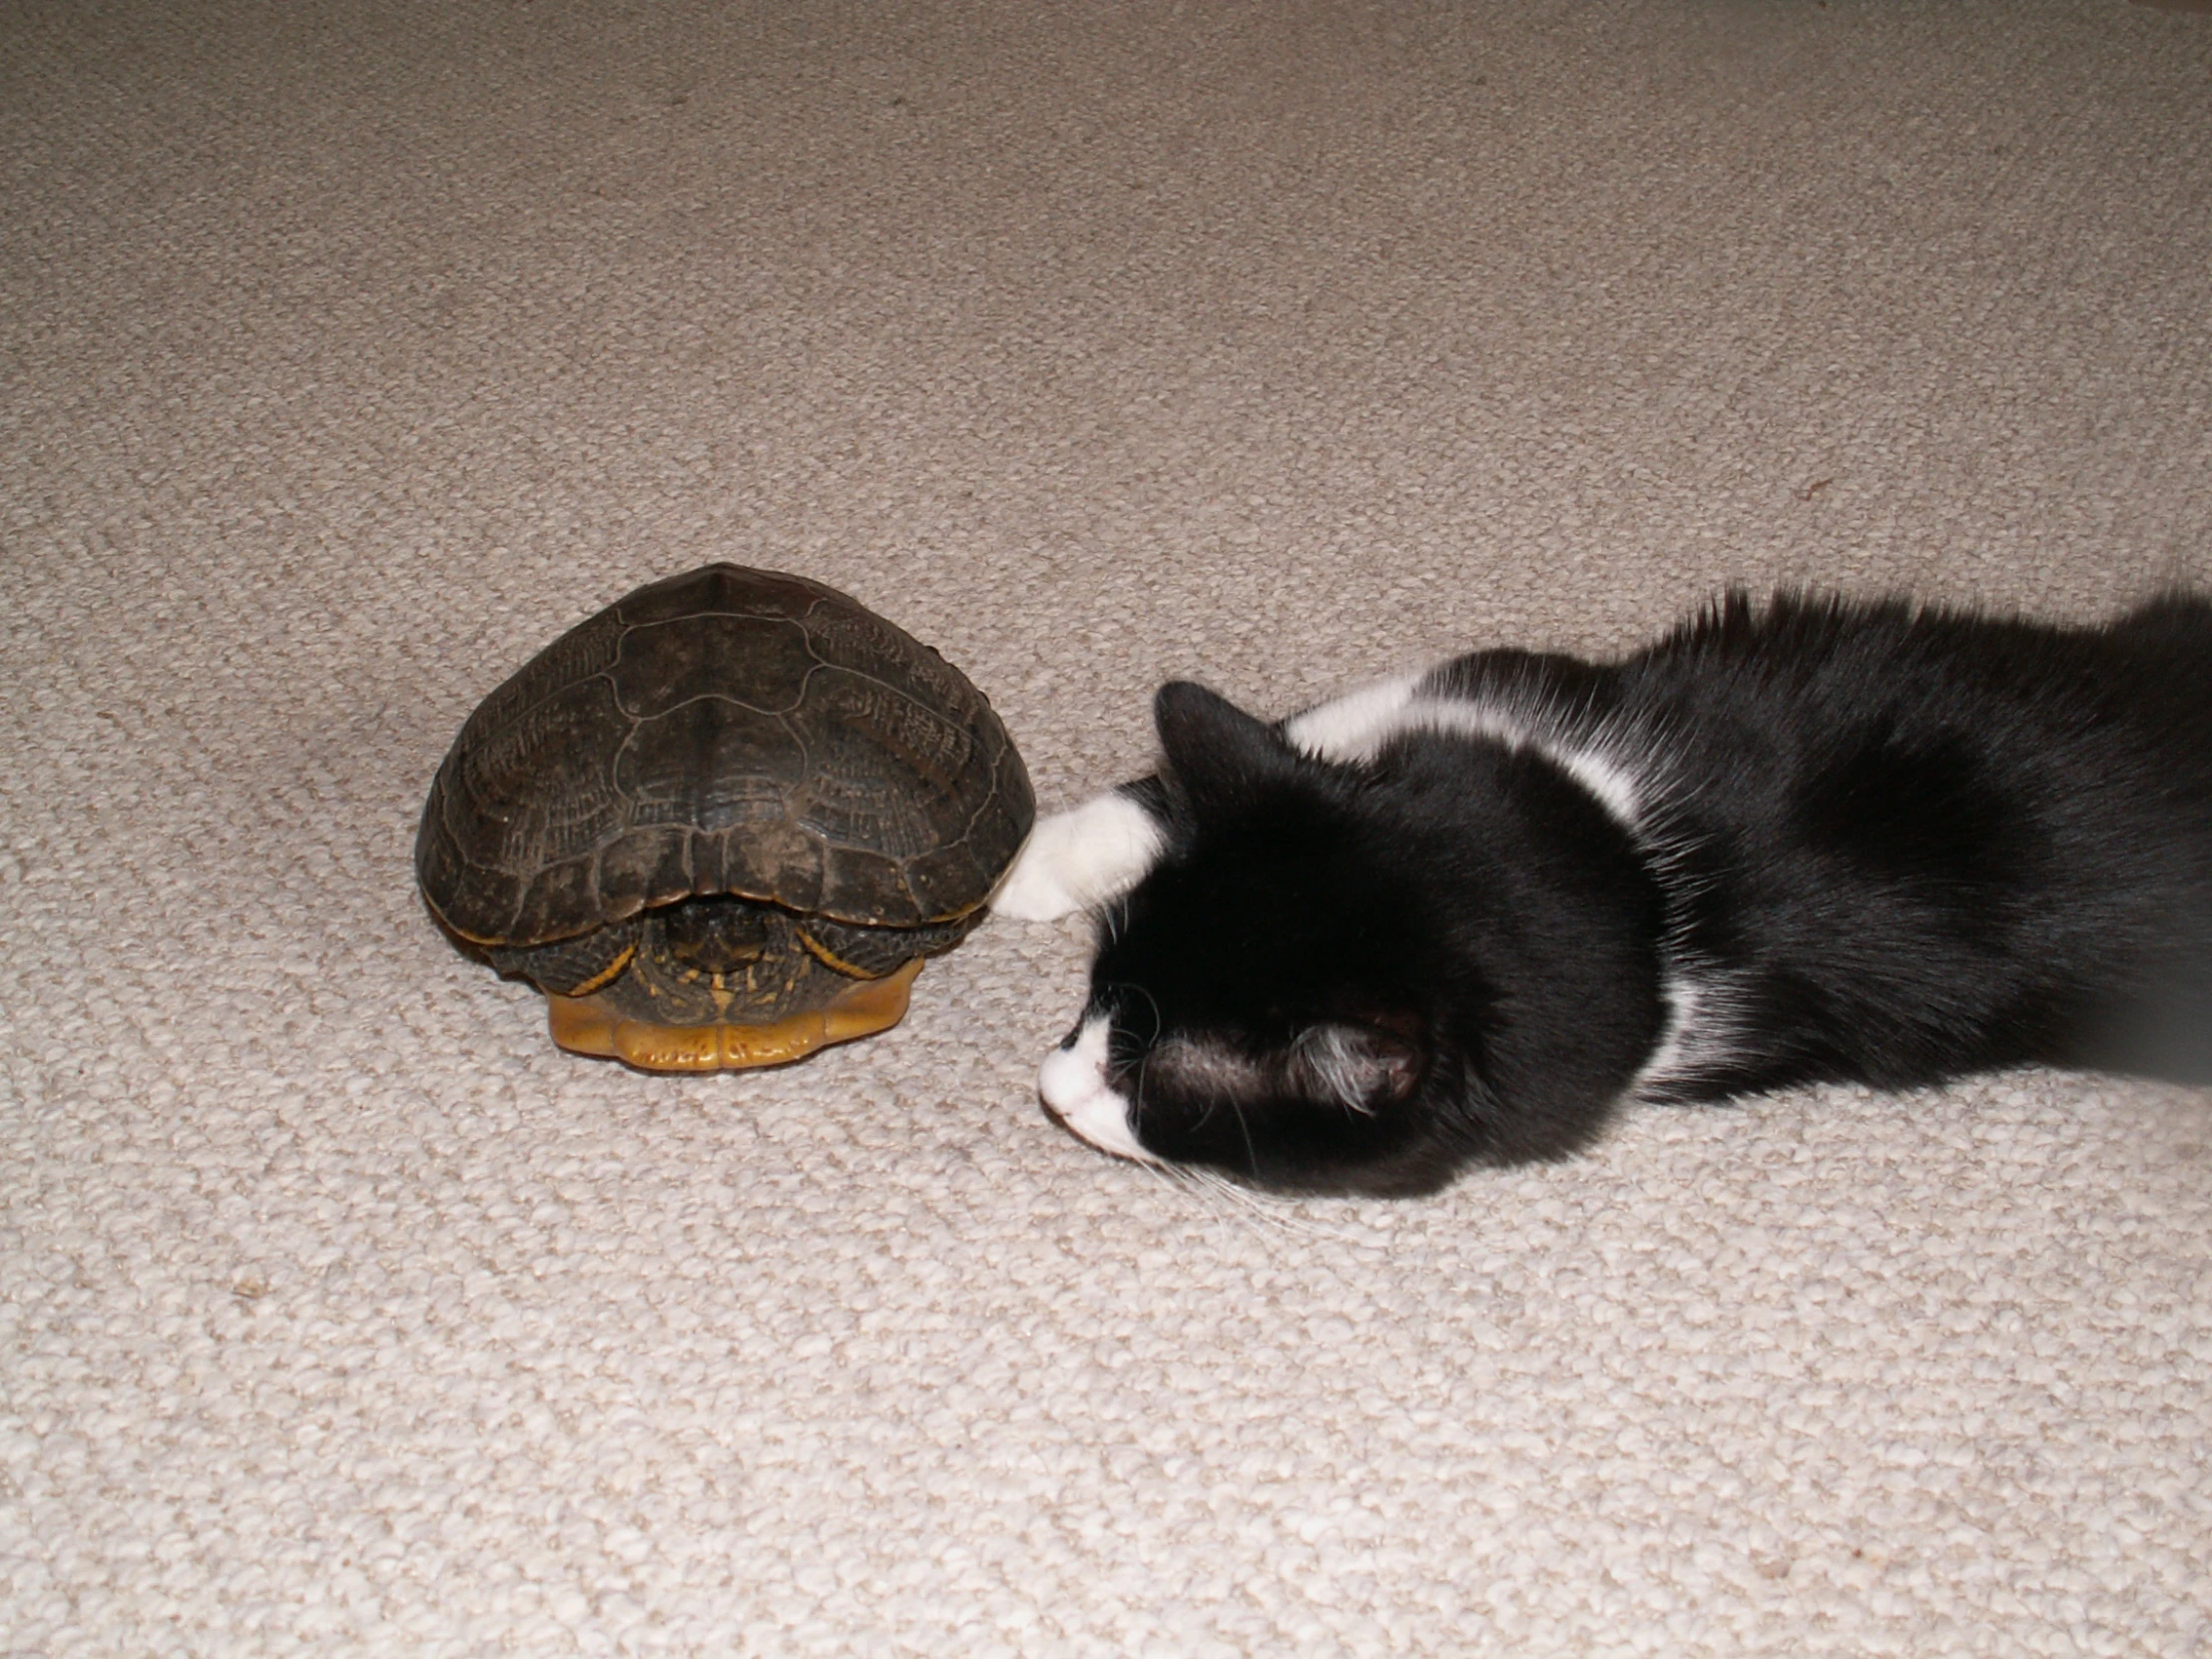 a cat looking at a turtle in the floor